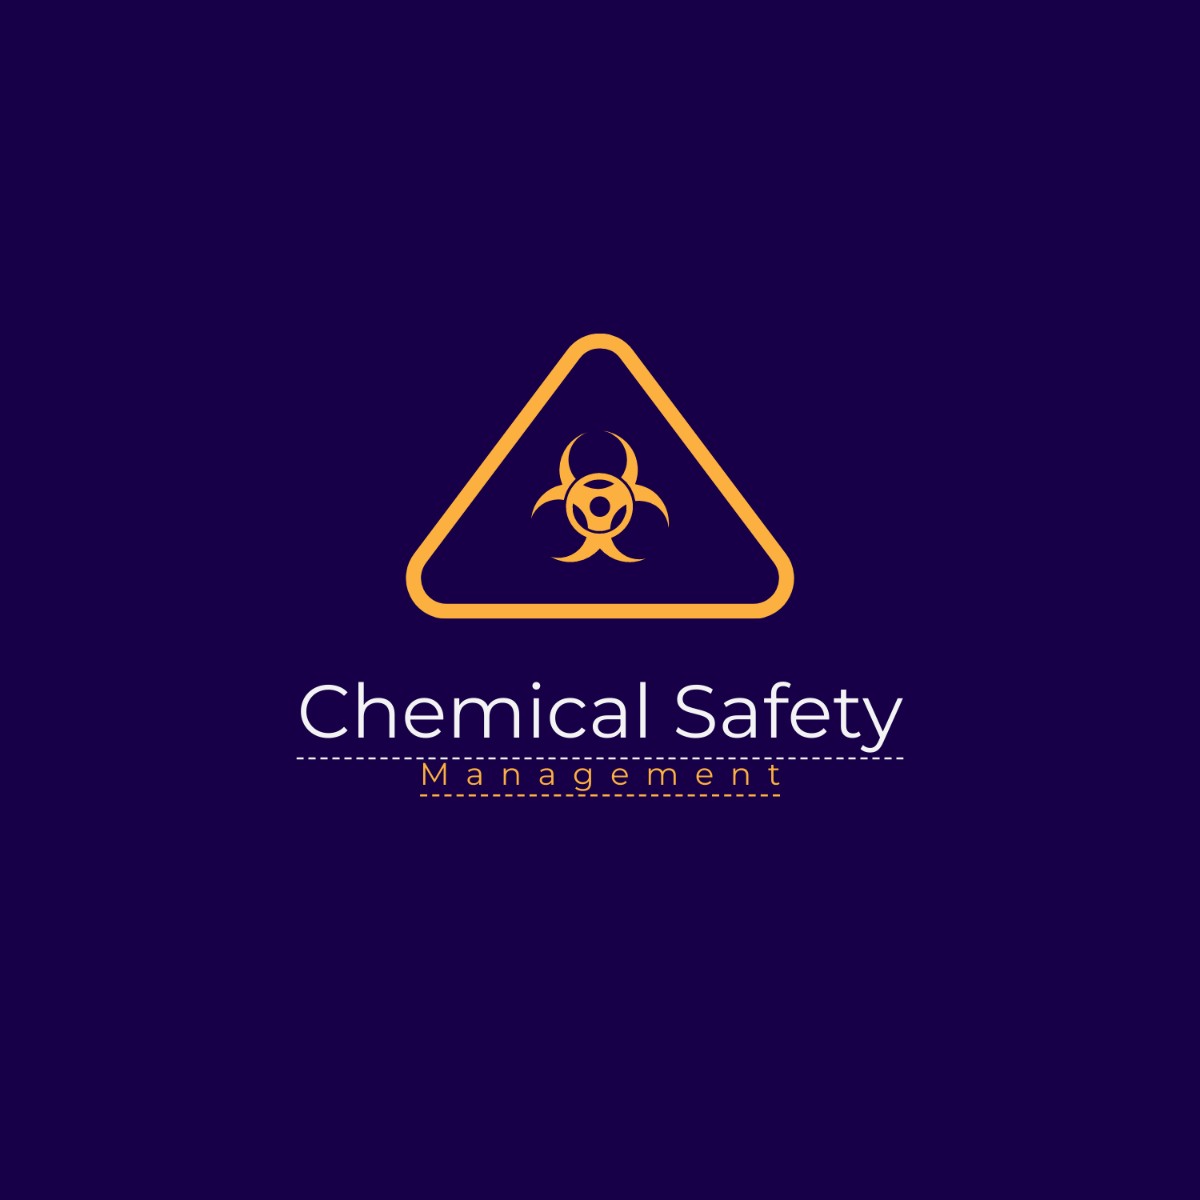 Chemical Safety Management Logo Template